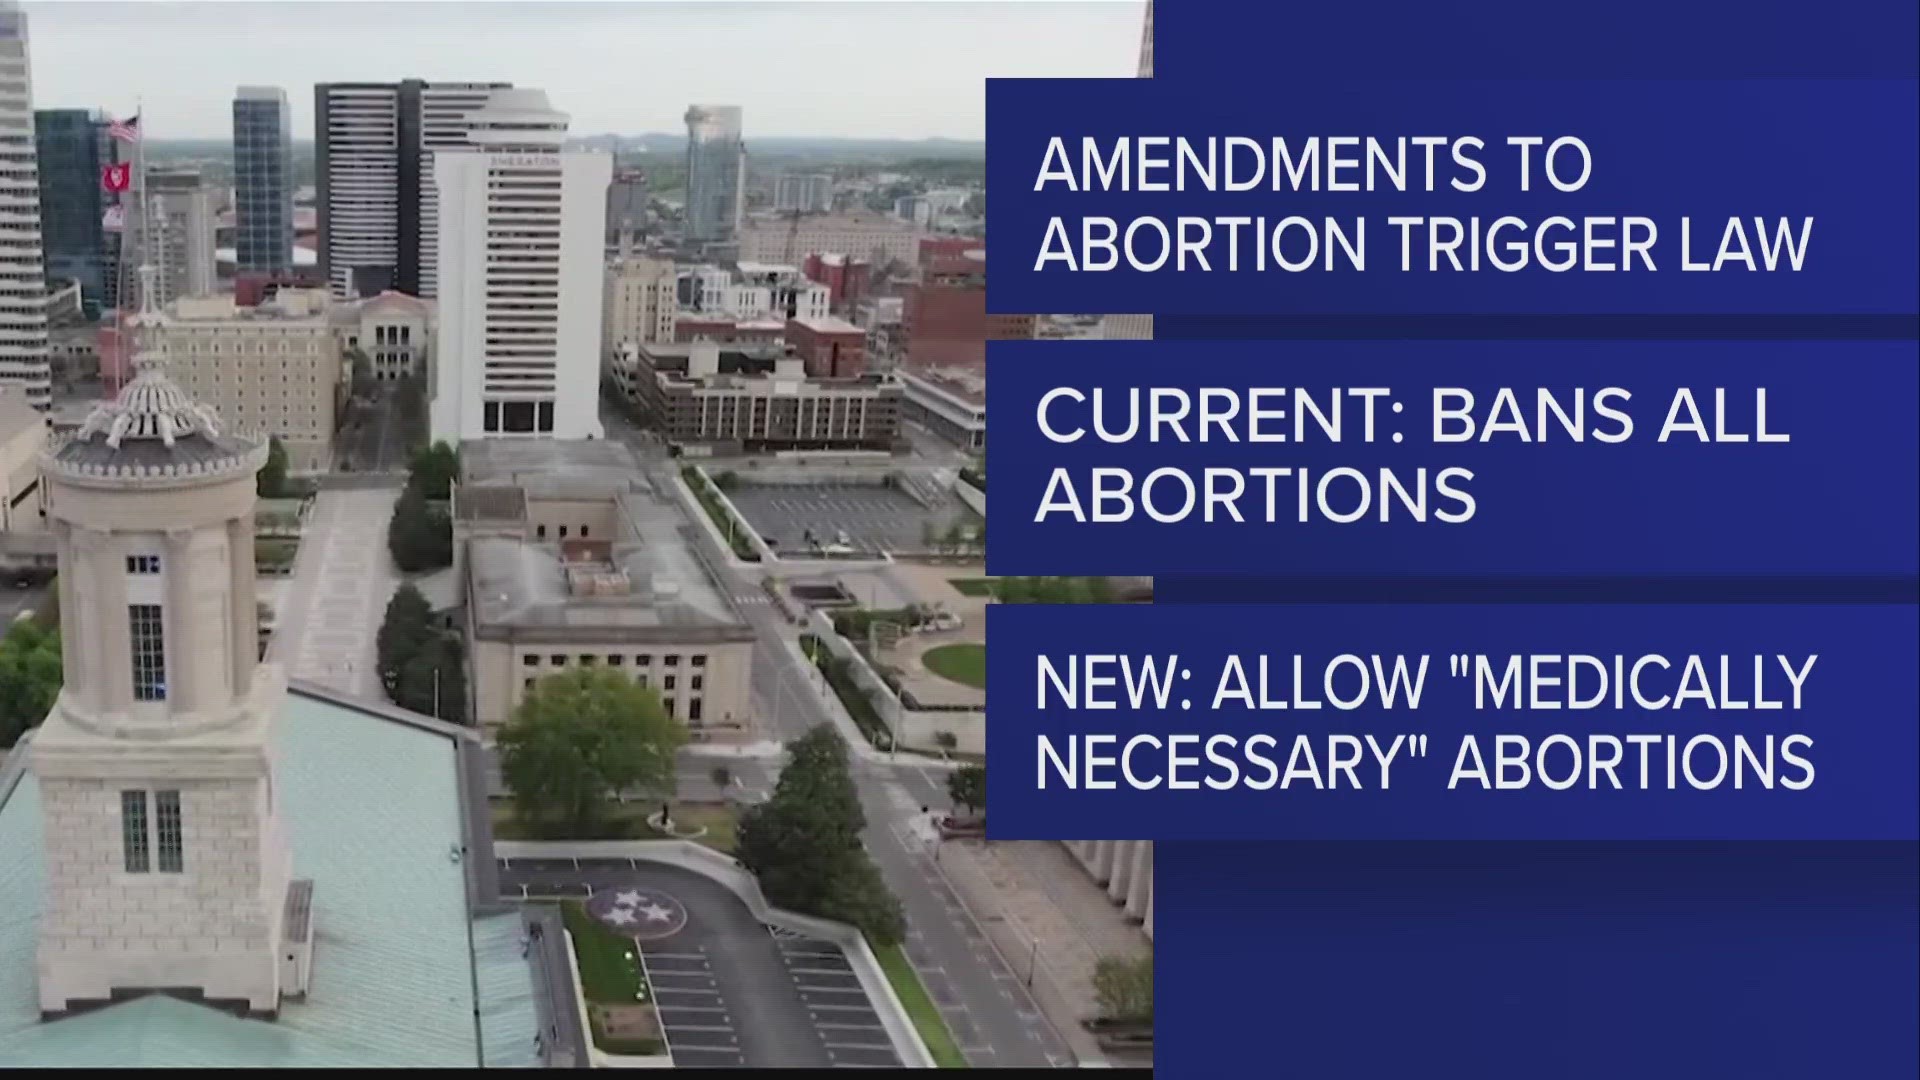 A new bill that would allow for "medically necessary" abortions goes before the Senate Judiciary Committee this week.